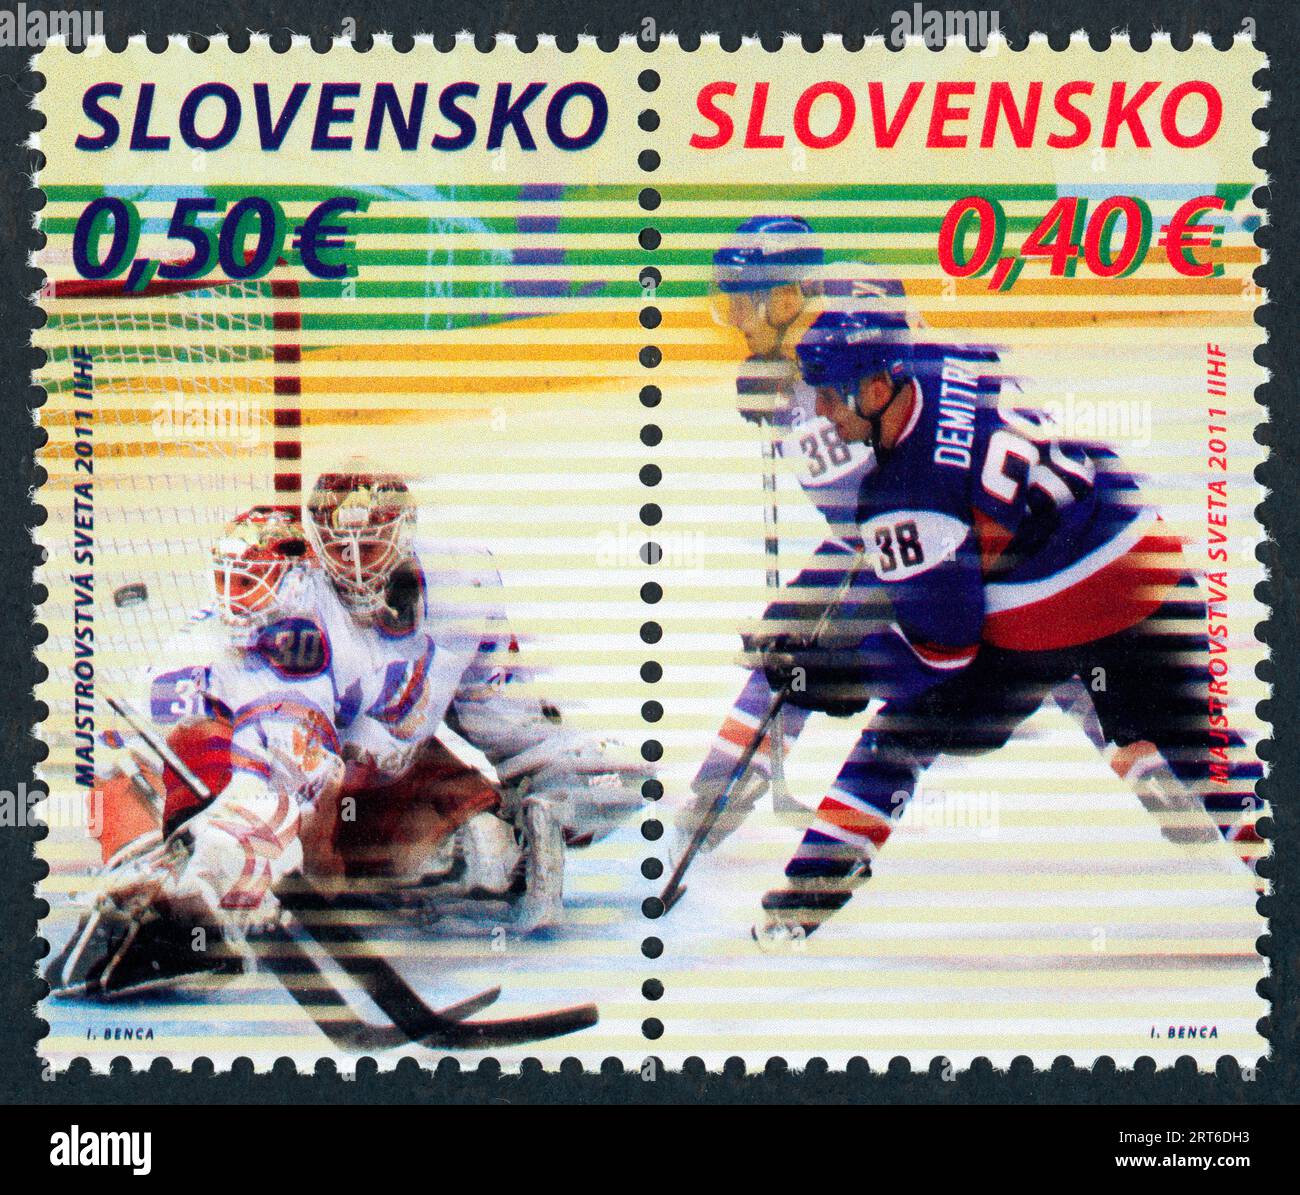 World Ice Hockey Championship 2011 held in Slovakia. Postage stamp issued in Slovakia in 2011. Stock Photo